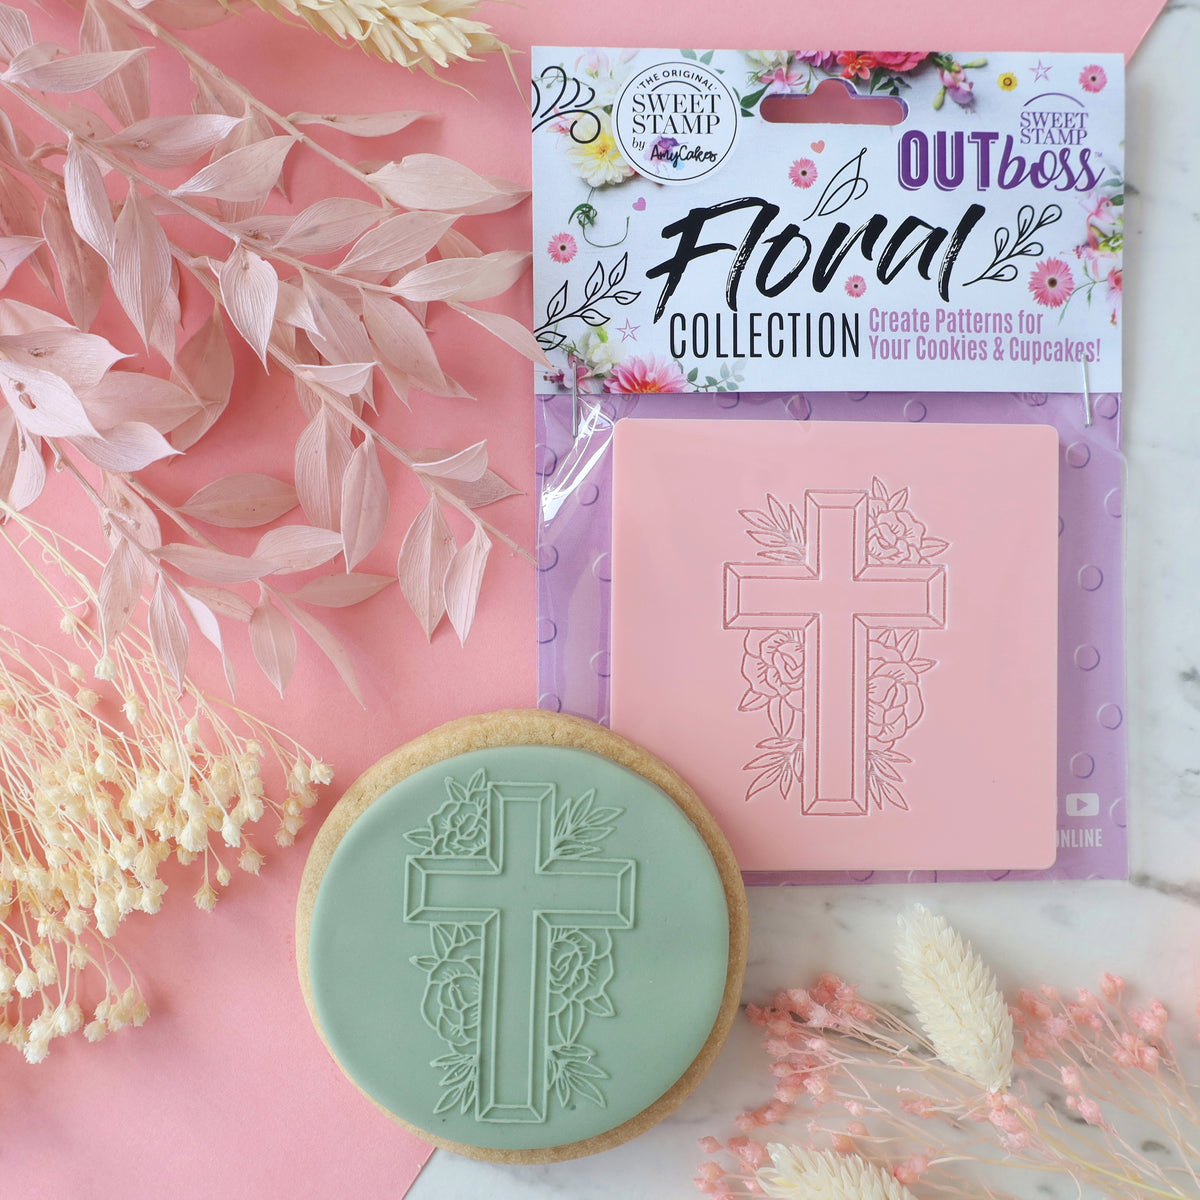 Sweet Stamp OUTboss Outbossing Sugarcraft Stamp - Floral Cross - Kate's Cupboard